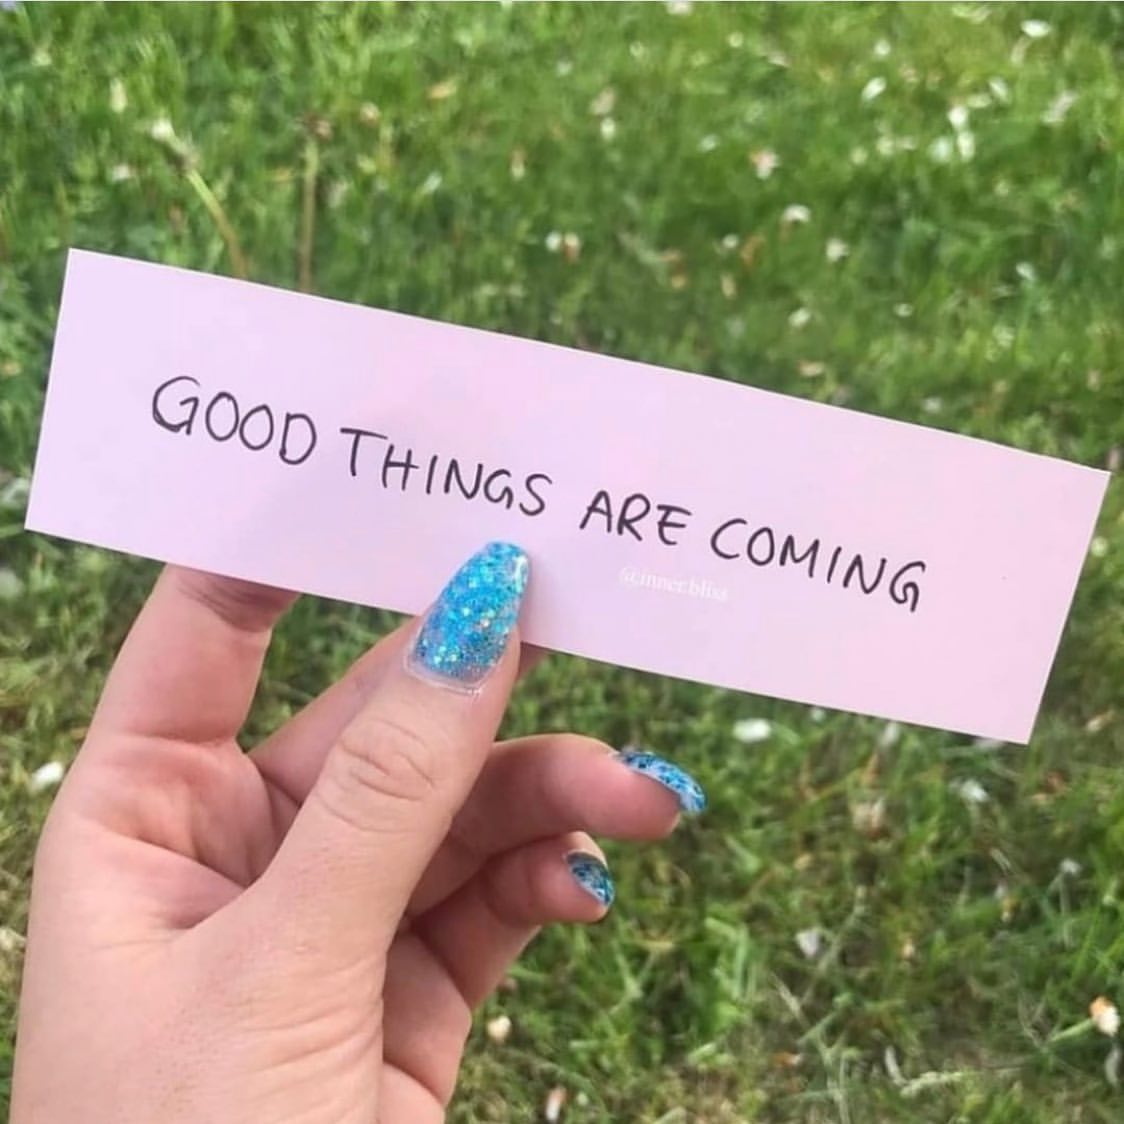 Good things are coming.